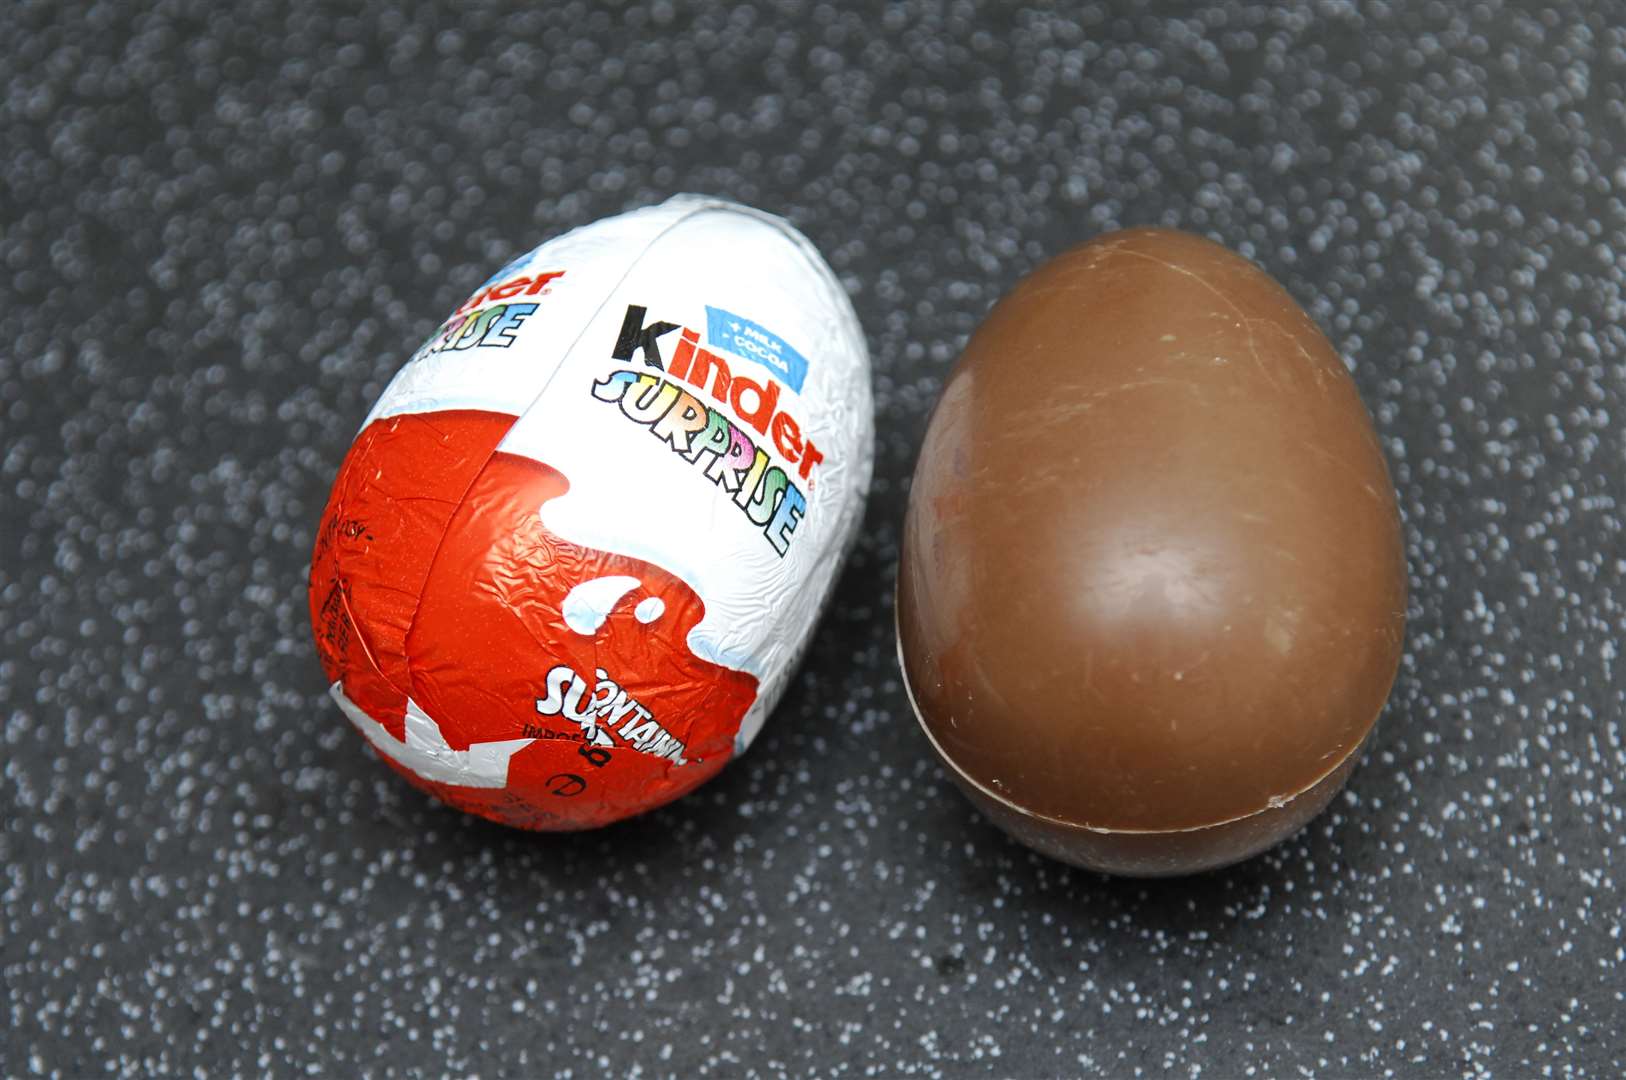 Kinder Surprise eggs with particular best before dates are being recalled